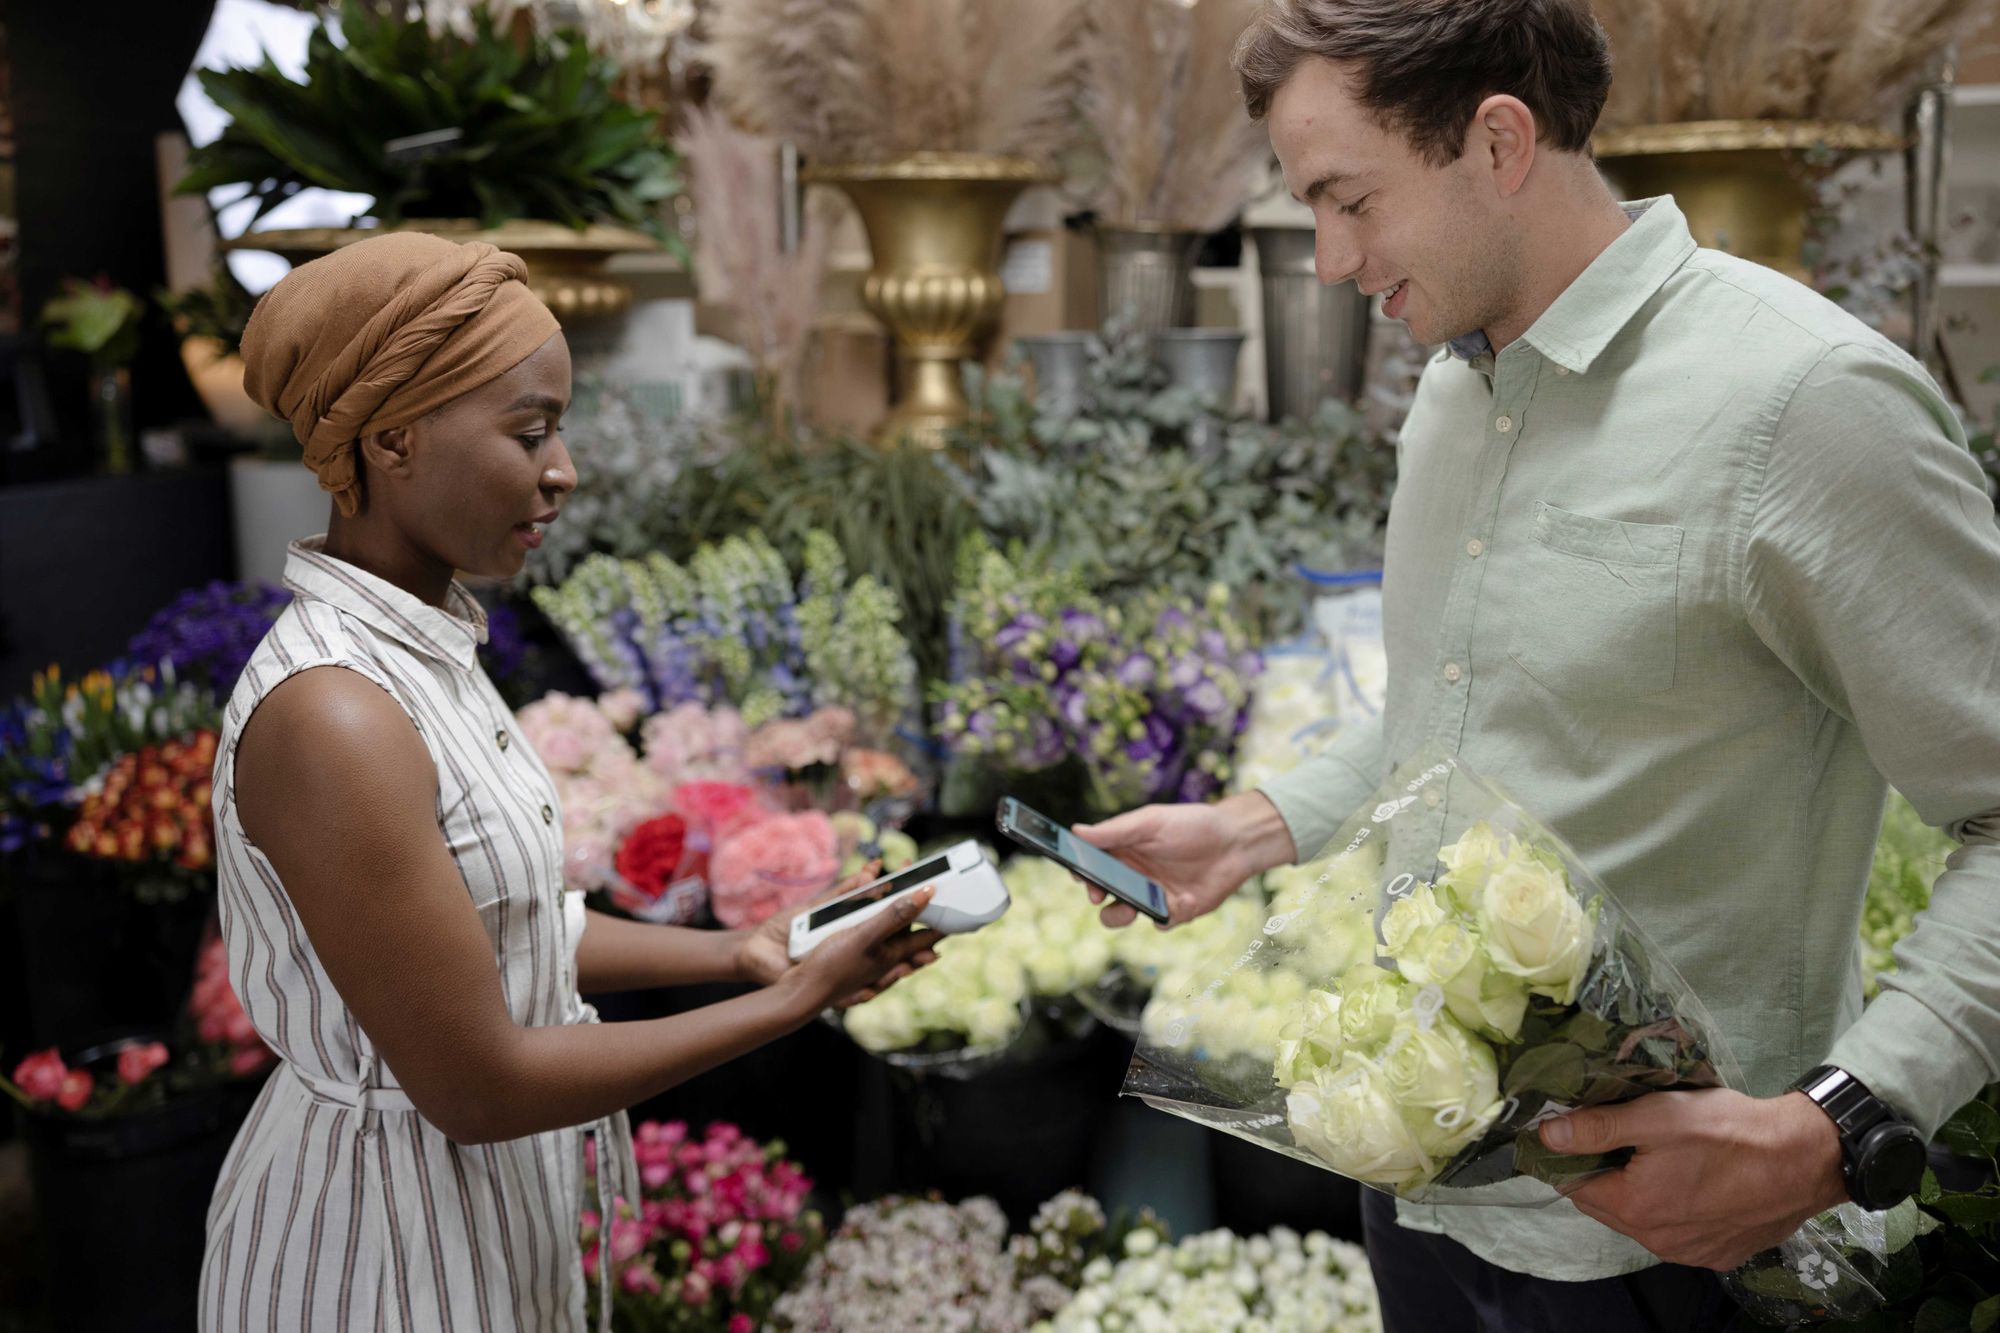 A customer taps his phone to pay on a handheld POS device at a floral shop